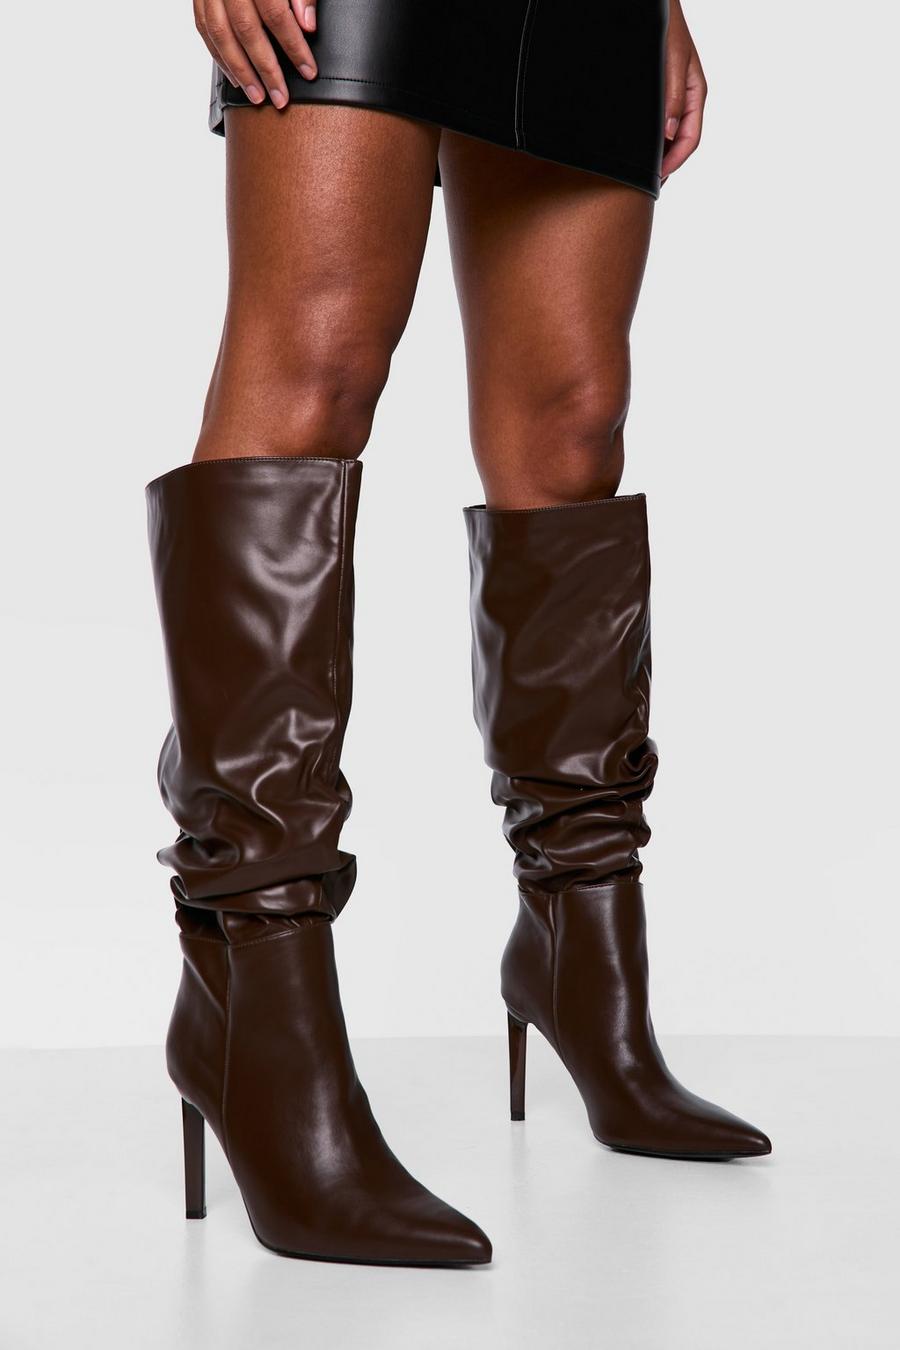 Chocolate Wide Fit Ruched Stiletto Pointed Toe Boots  